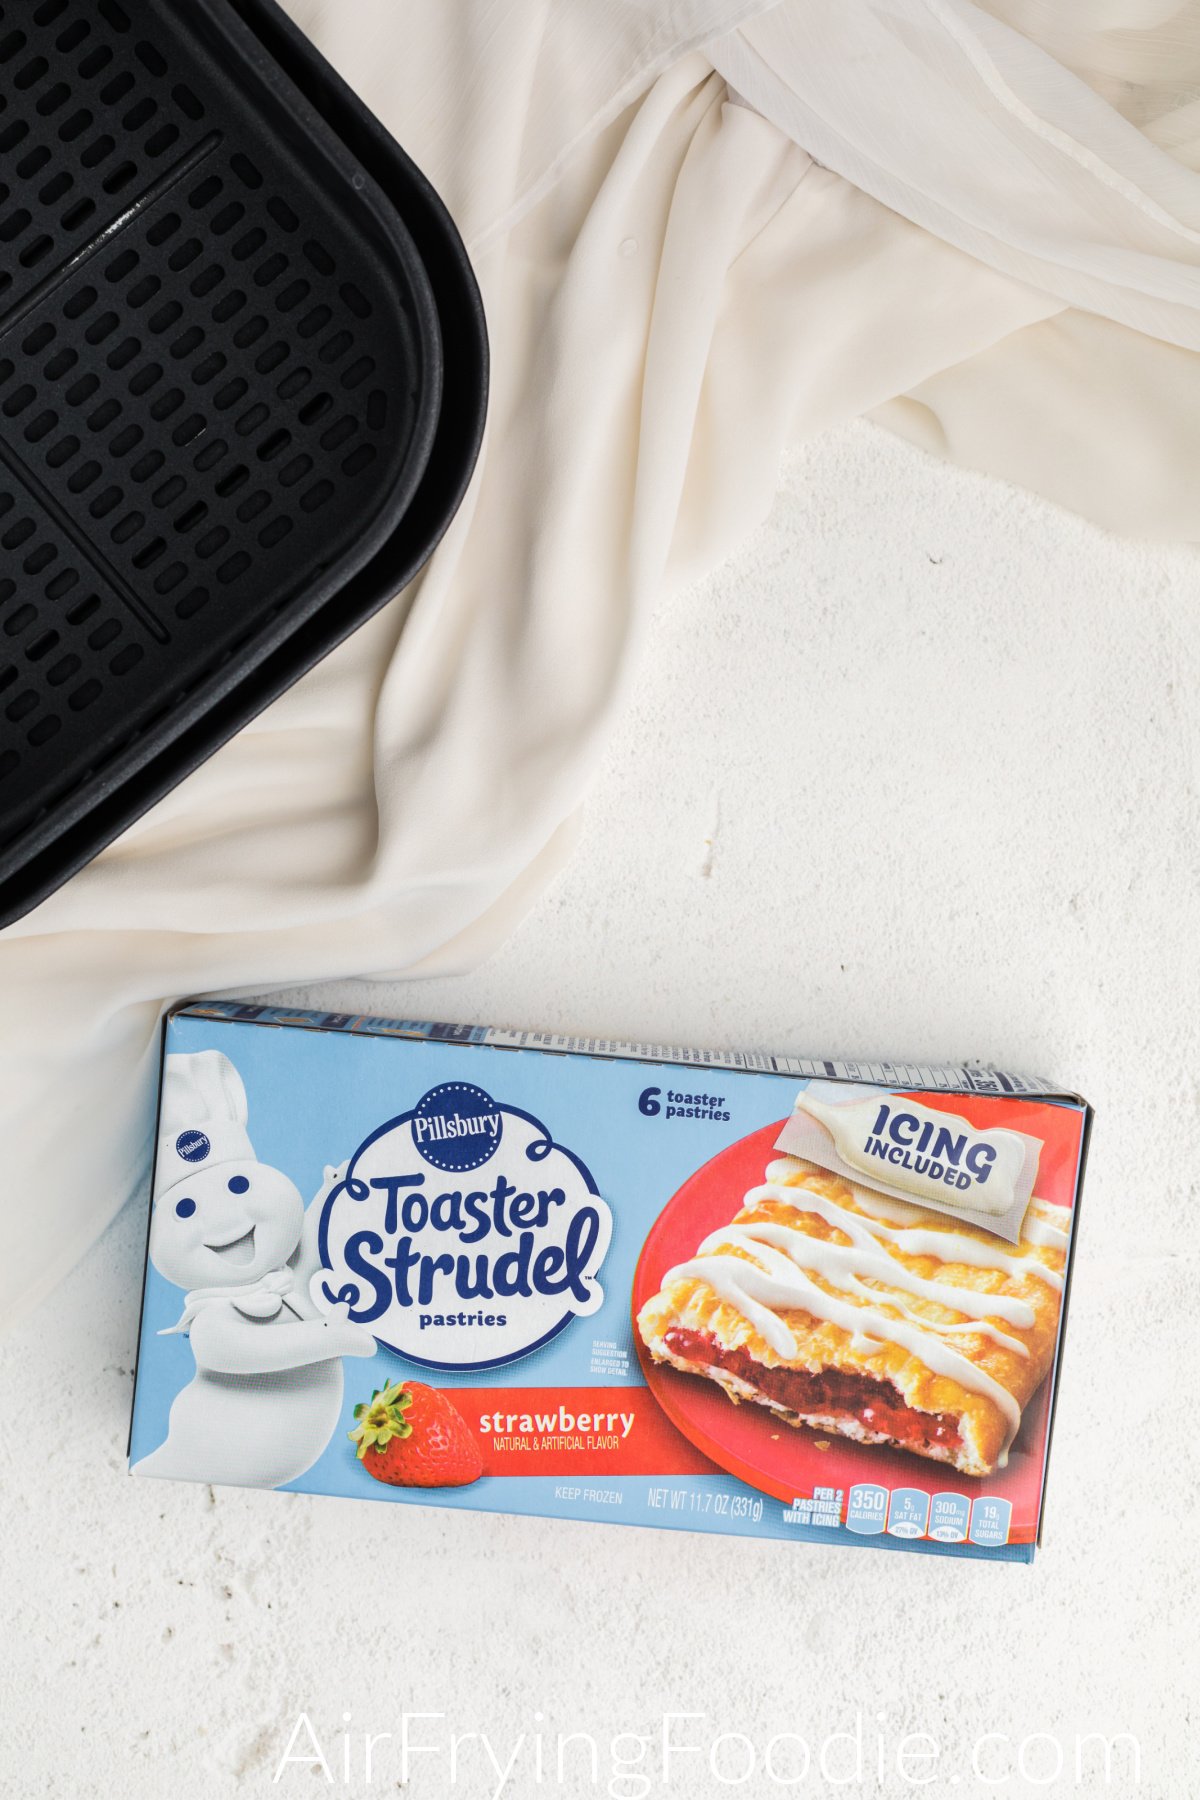 Air fryer basket and Pillsbury toaster strudel in a box, ready to cook. 